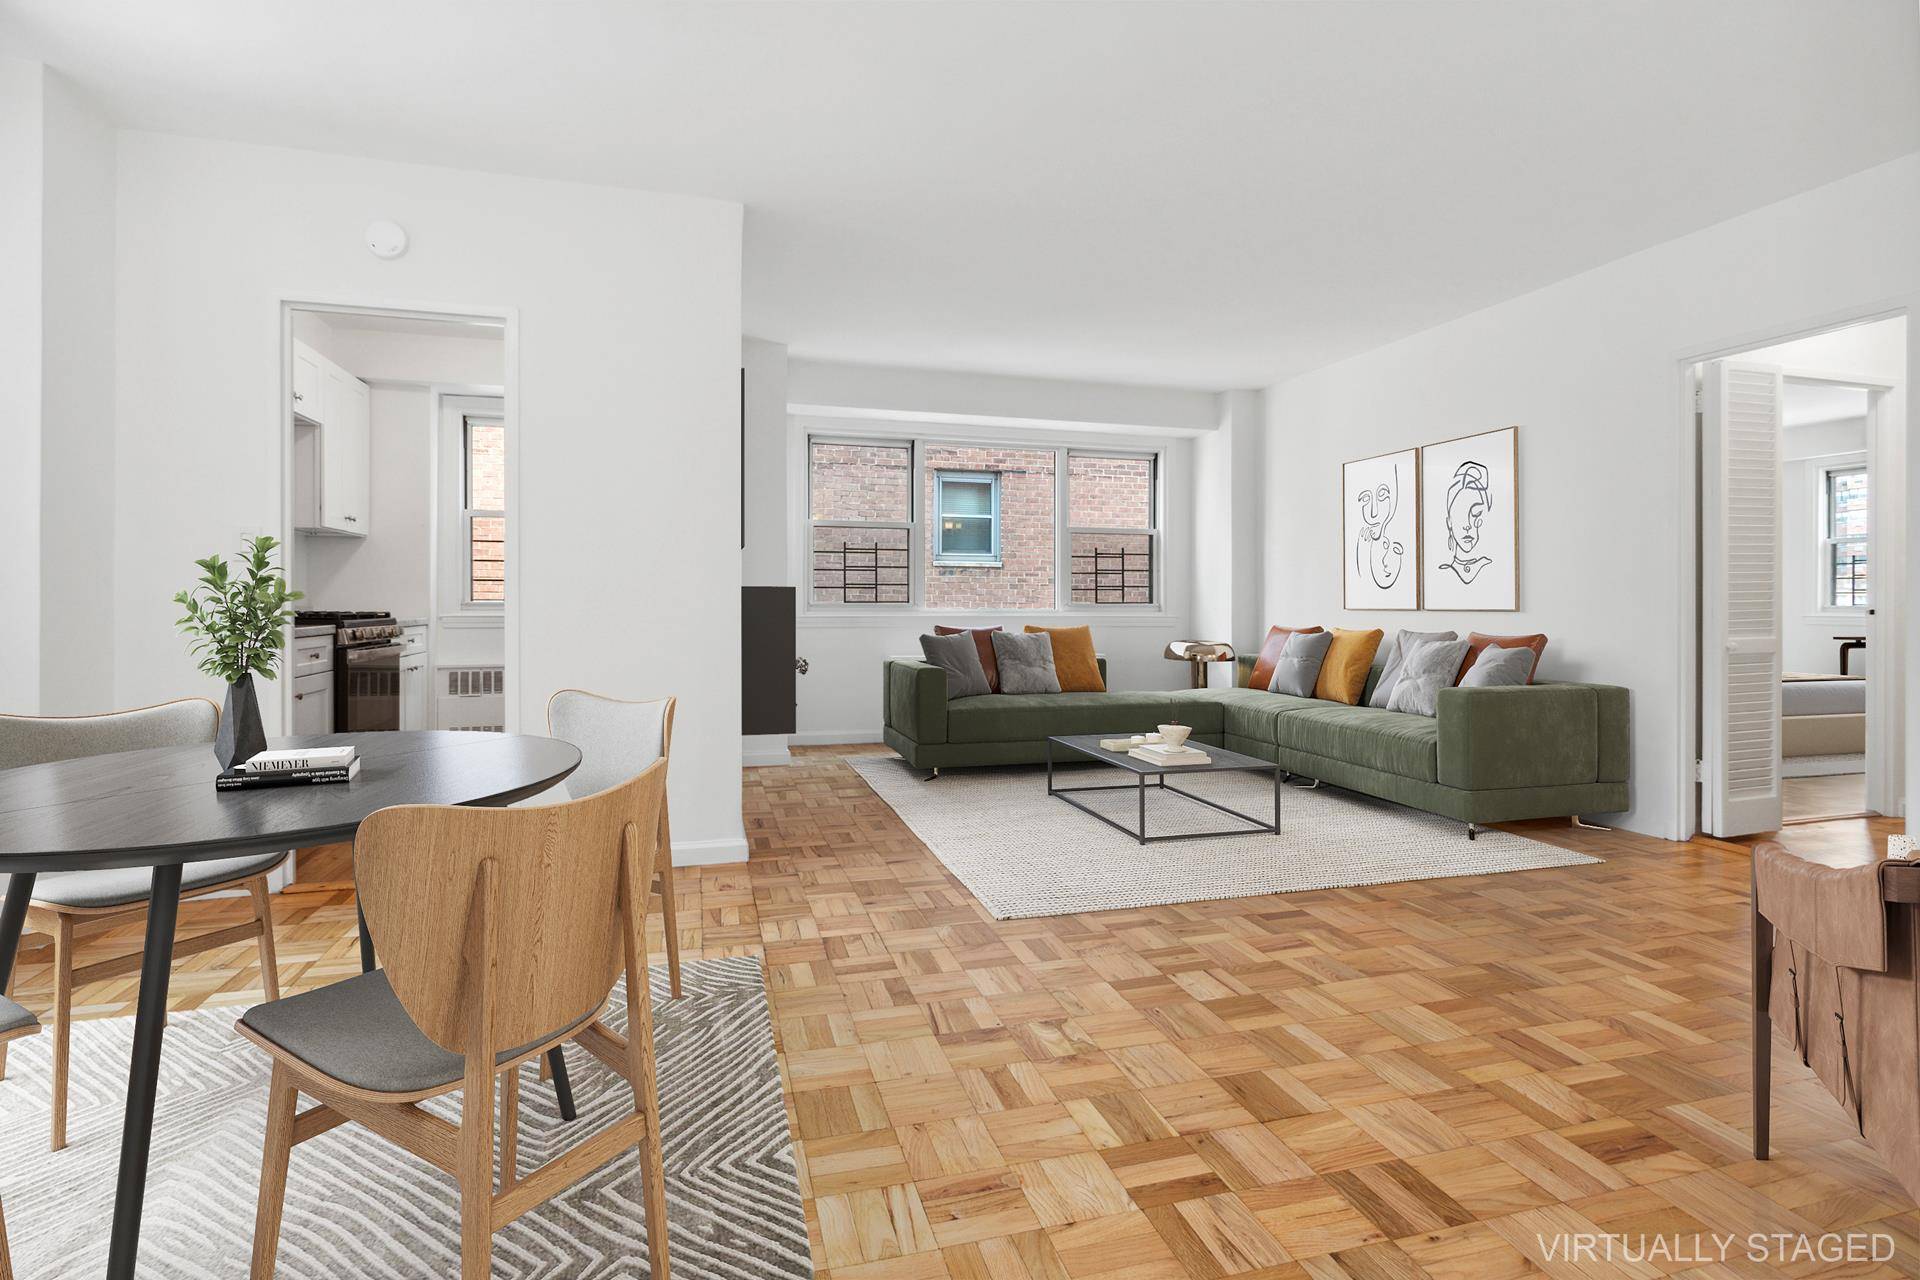 Welcome to this beautiful and newly renovated large 1 bedroom, 1 bathroom home in the heart of the Upper East Side !